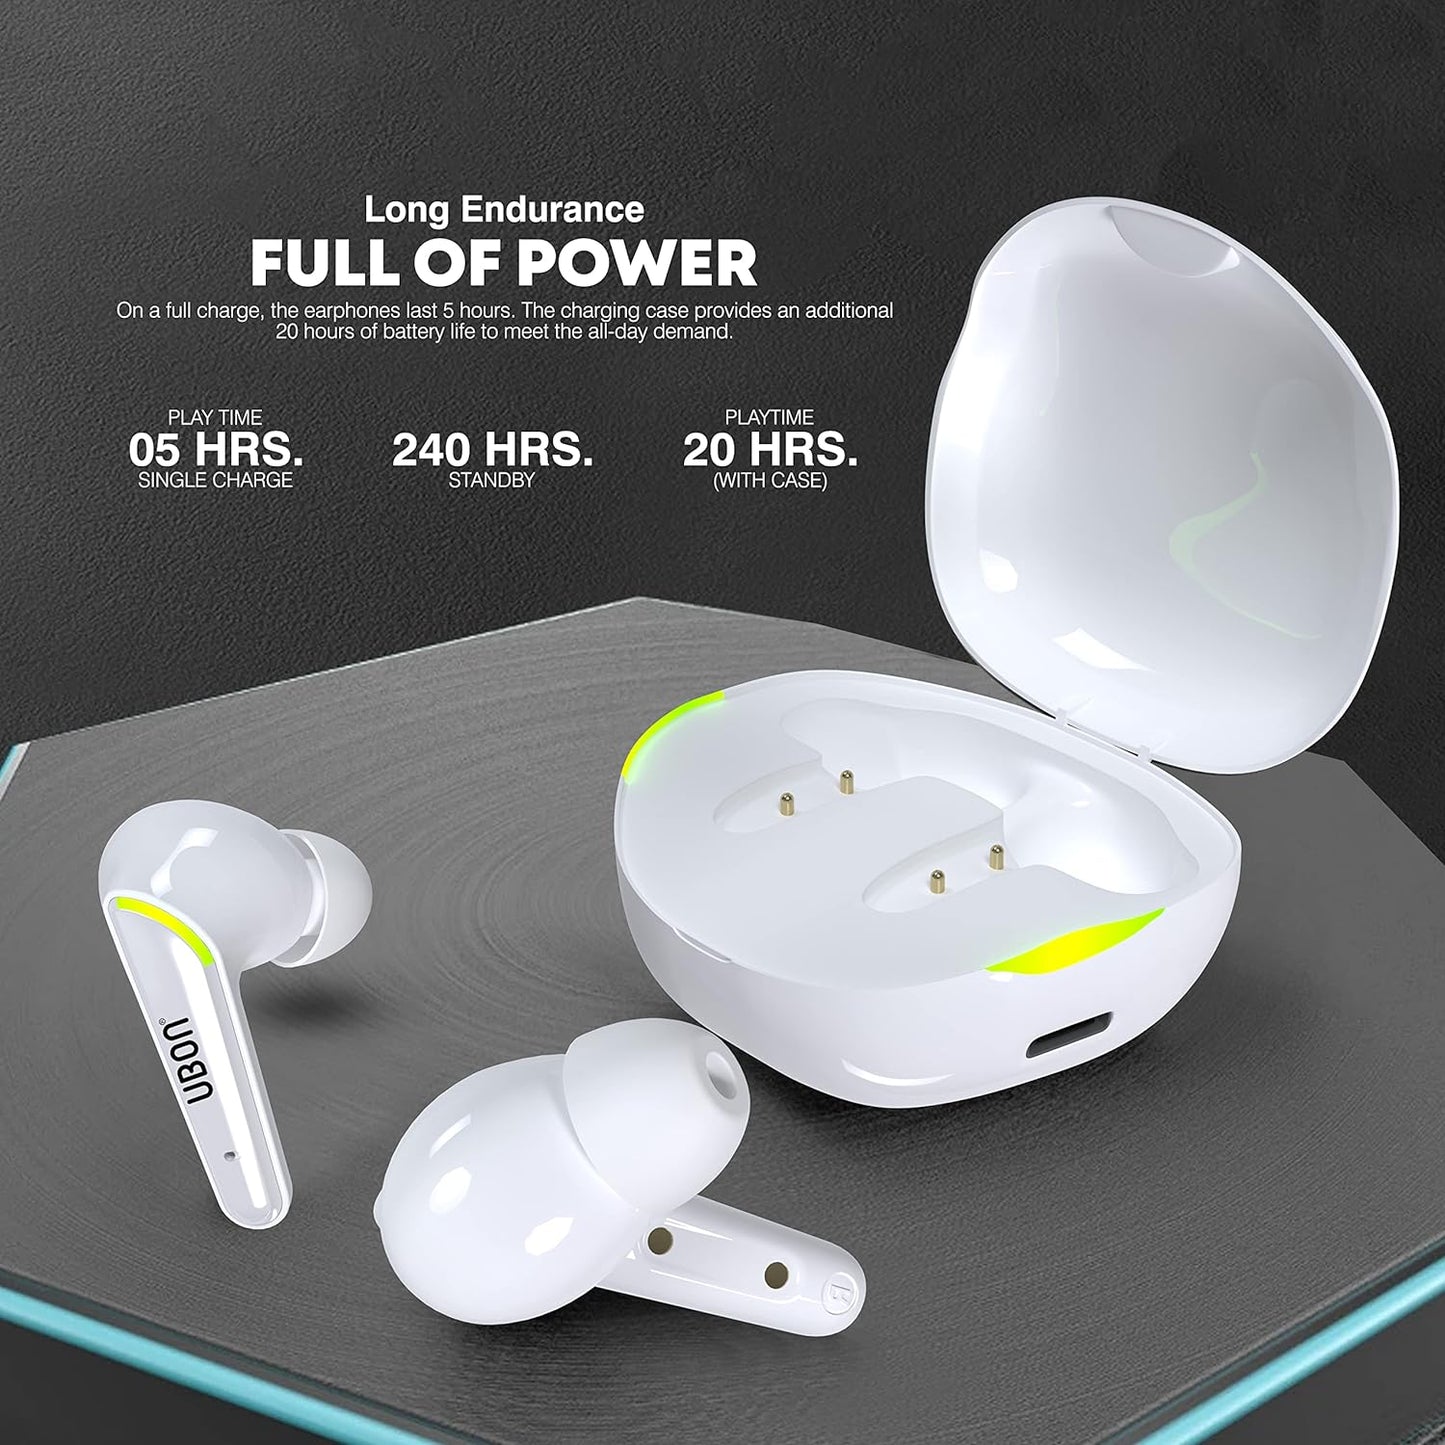 UBON Wireless Earbuds Bluetooth On Ear Headphones Air Shark BT-285, v5.0 Bluetooth Earphone with TWS Function, Up to 20 Hours Playtime, Type-C Fast Charging, Touch Controls & Noise Isolation